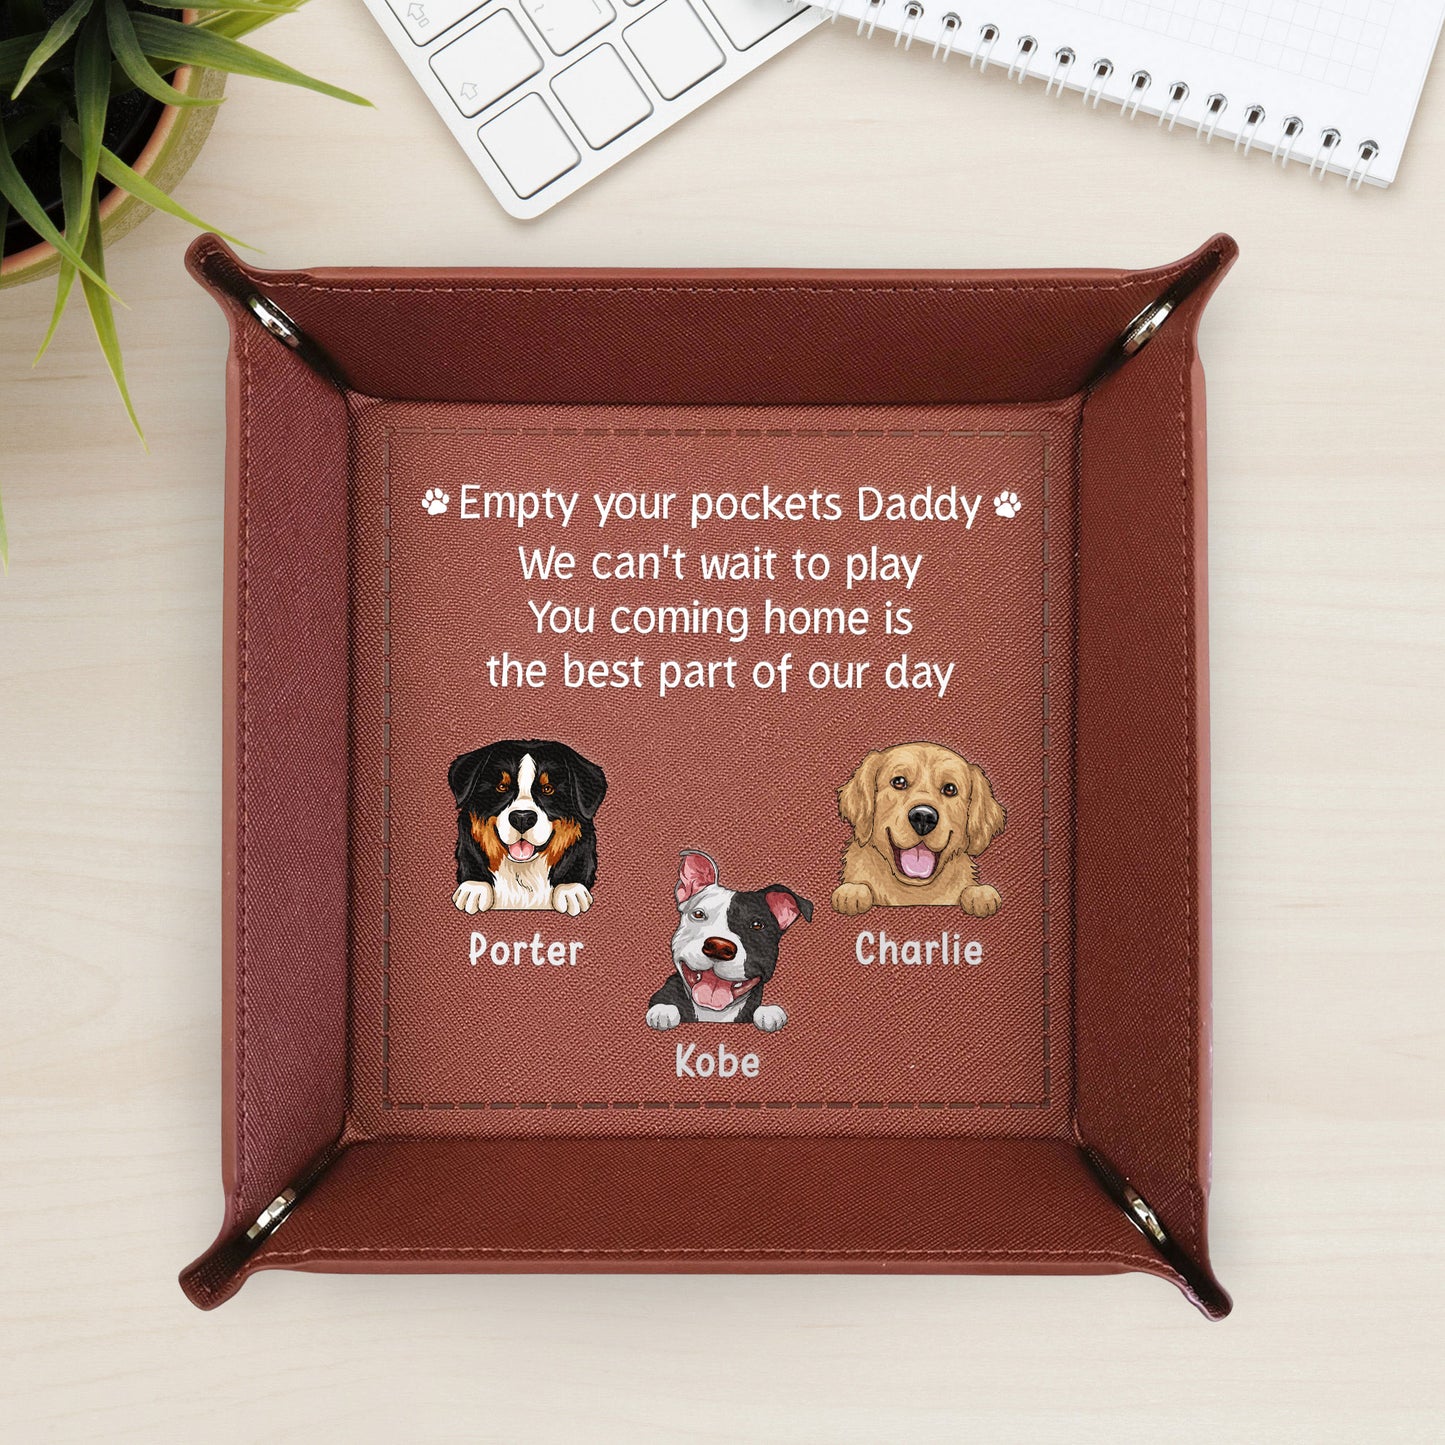 Empty Your Pockets Daddy Play With Us Dogs - Personalized Leather Valet Tray